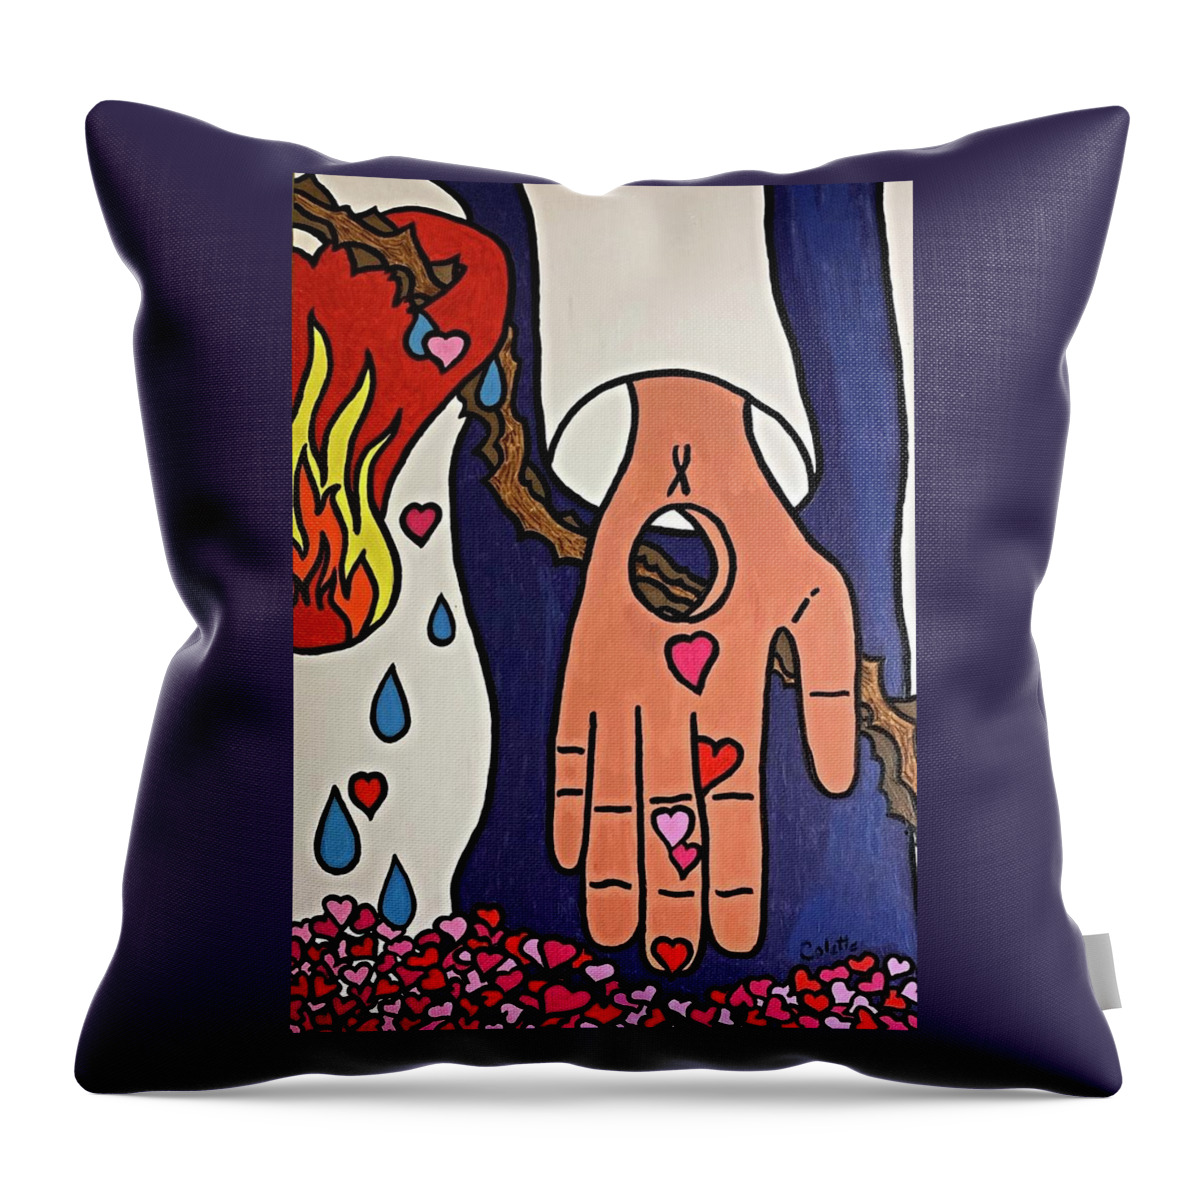 Acrylic Throw Pillow featuring the painting Ultimate Love by Colette Lee